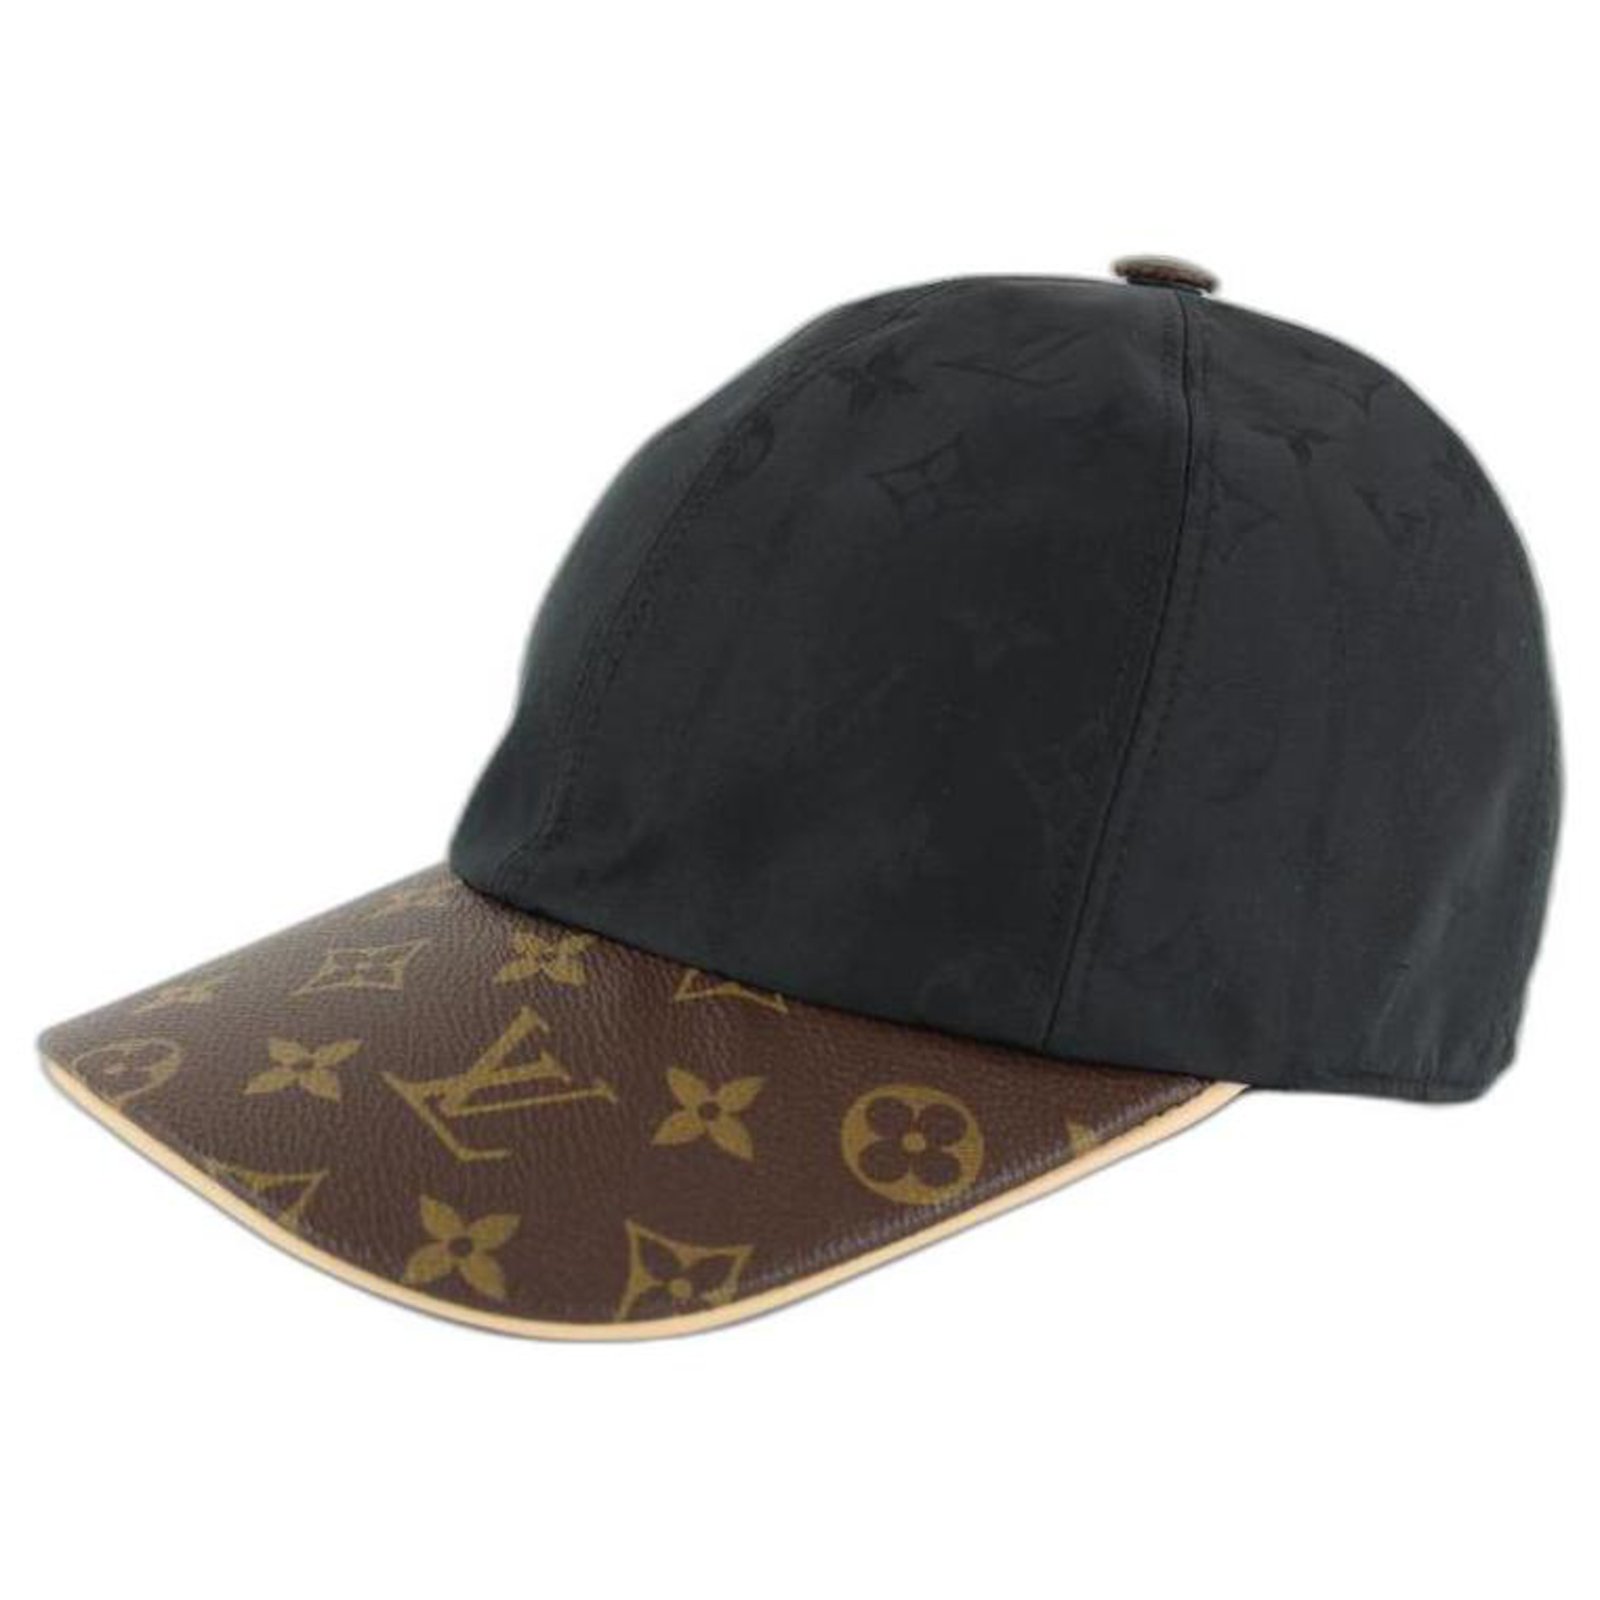 How to tell if a Louis Vuitton baseball-cap/hat is real - Quora